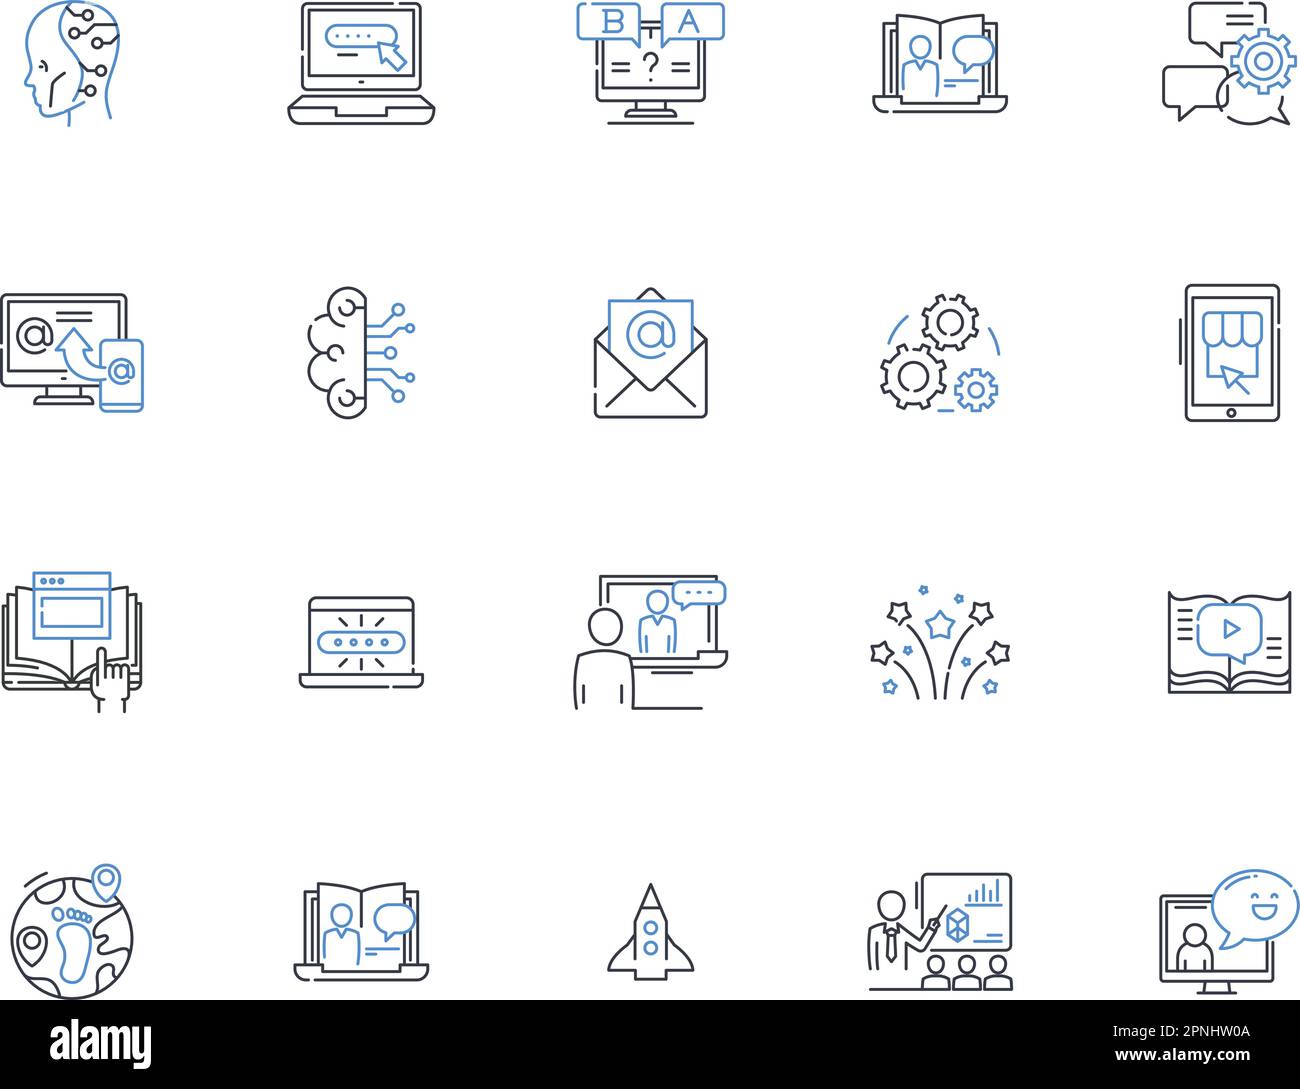 Educational technology line icons collection. Interactivity ...